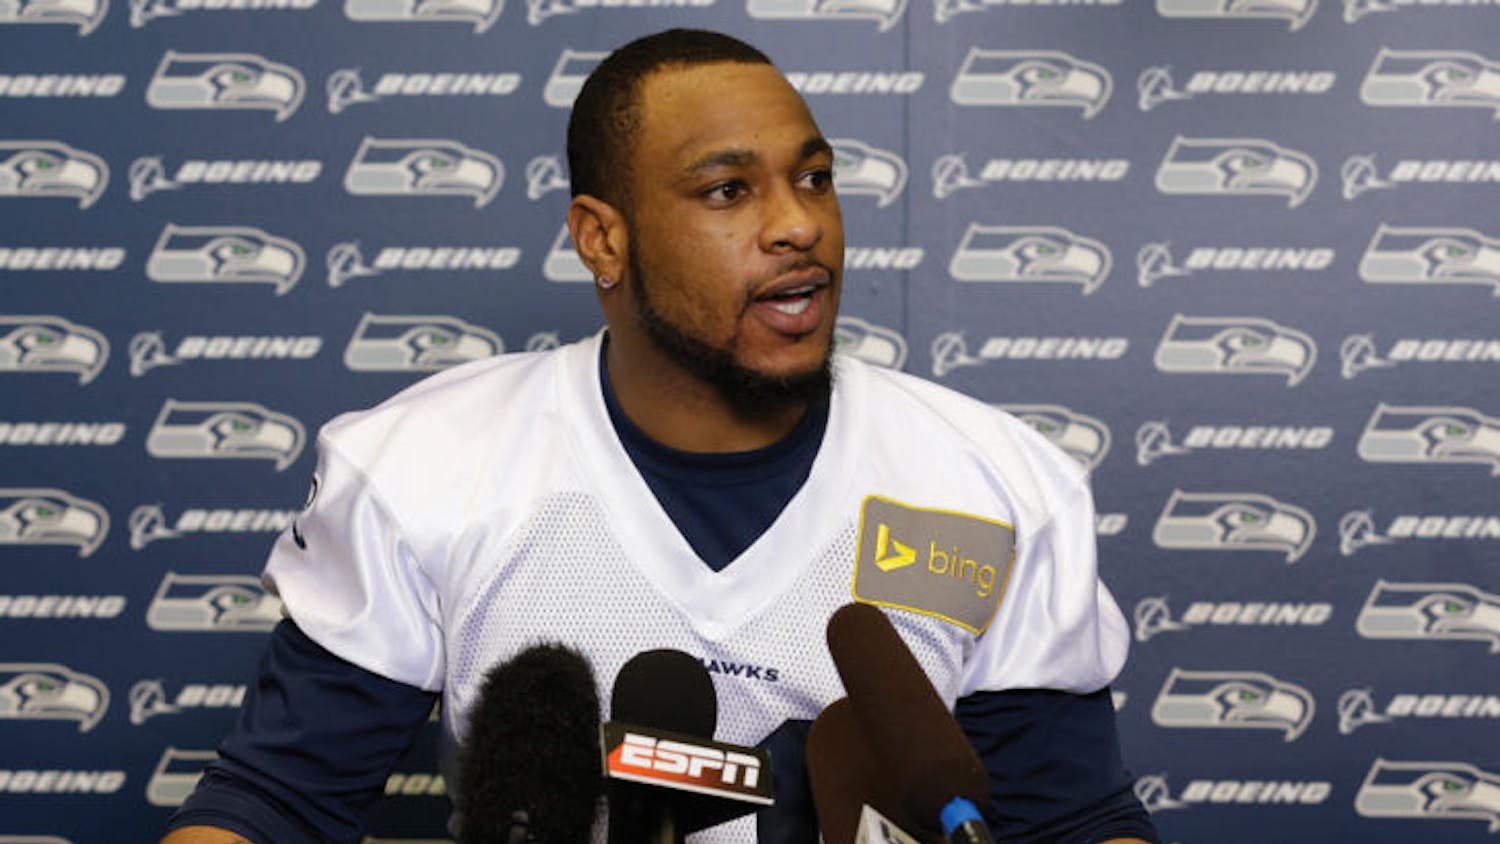 Seattle Seahawks wide receiver Percy&nbsp;Harvin talks to reporters after his team’s practice on Thursday in Renton, Wash. The Seahawks face the Denver Broncos on Sunday at 6:25 p.m. in Super Bowl XLVIII.